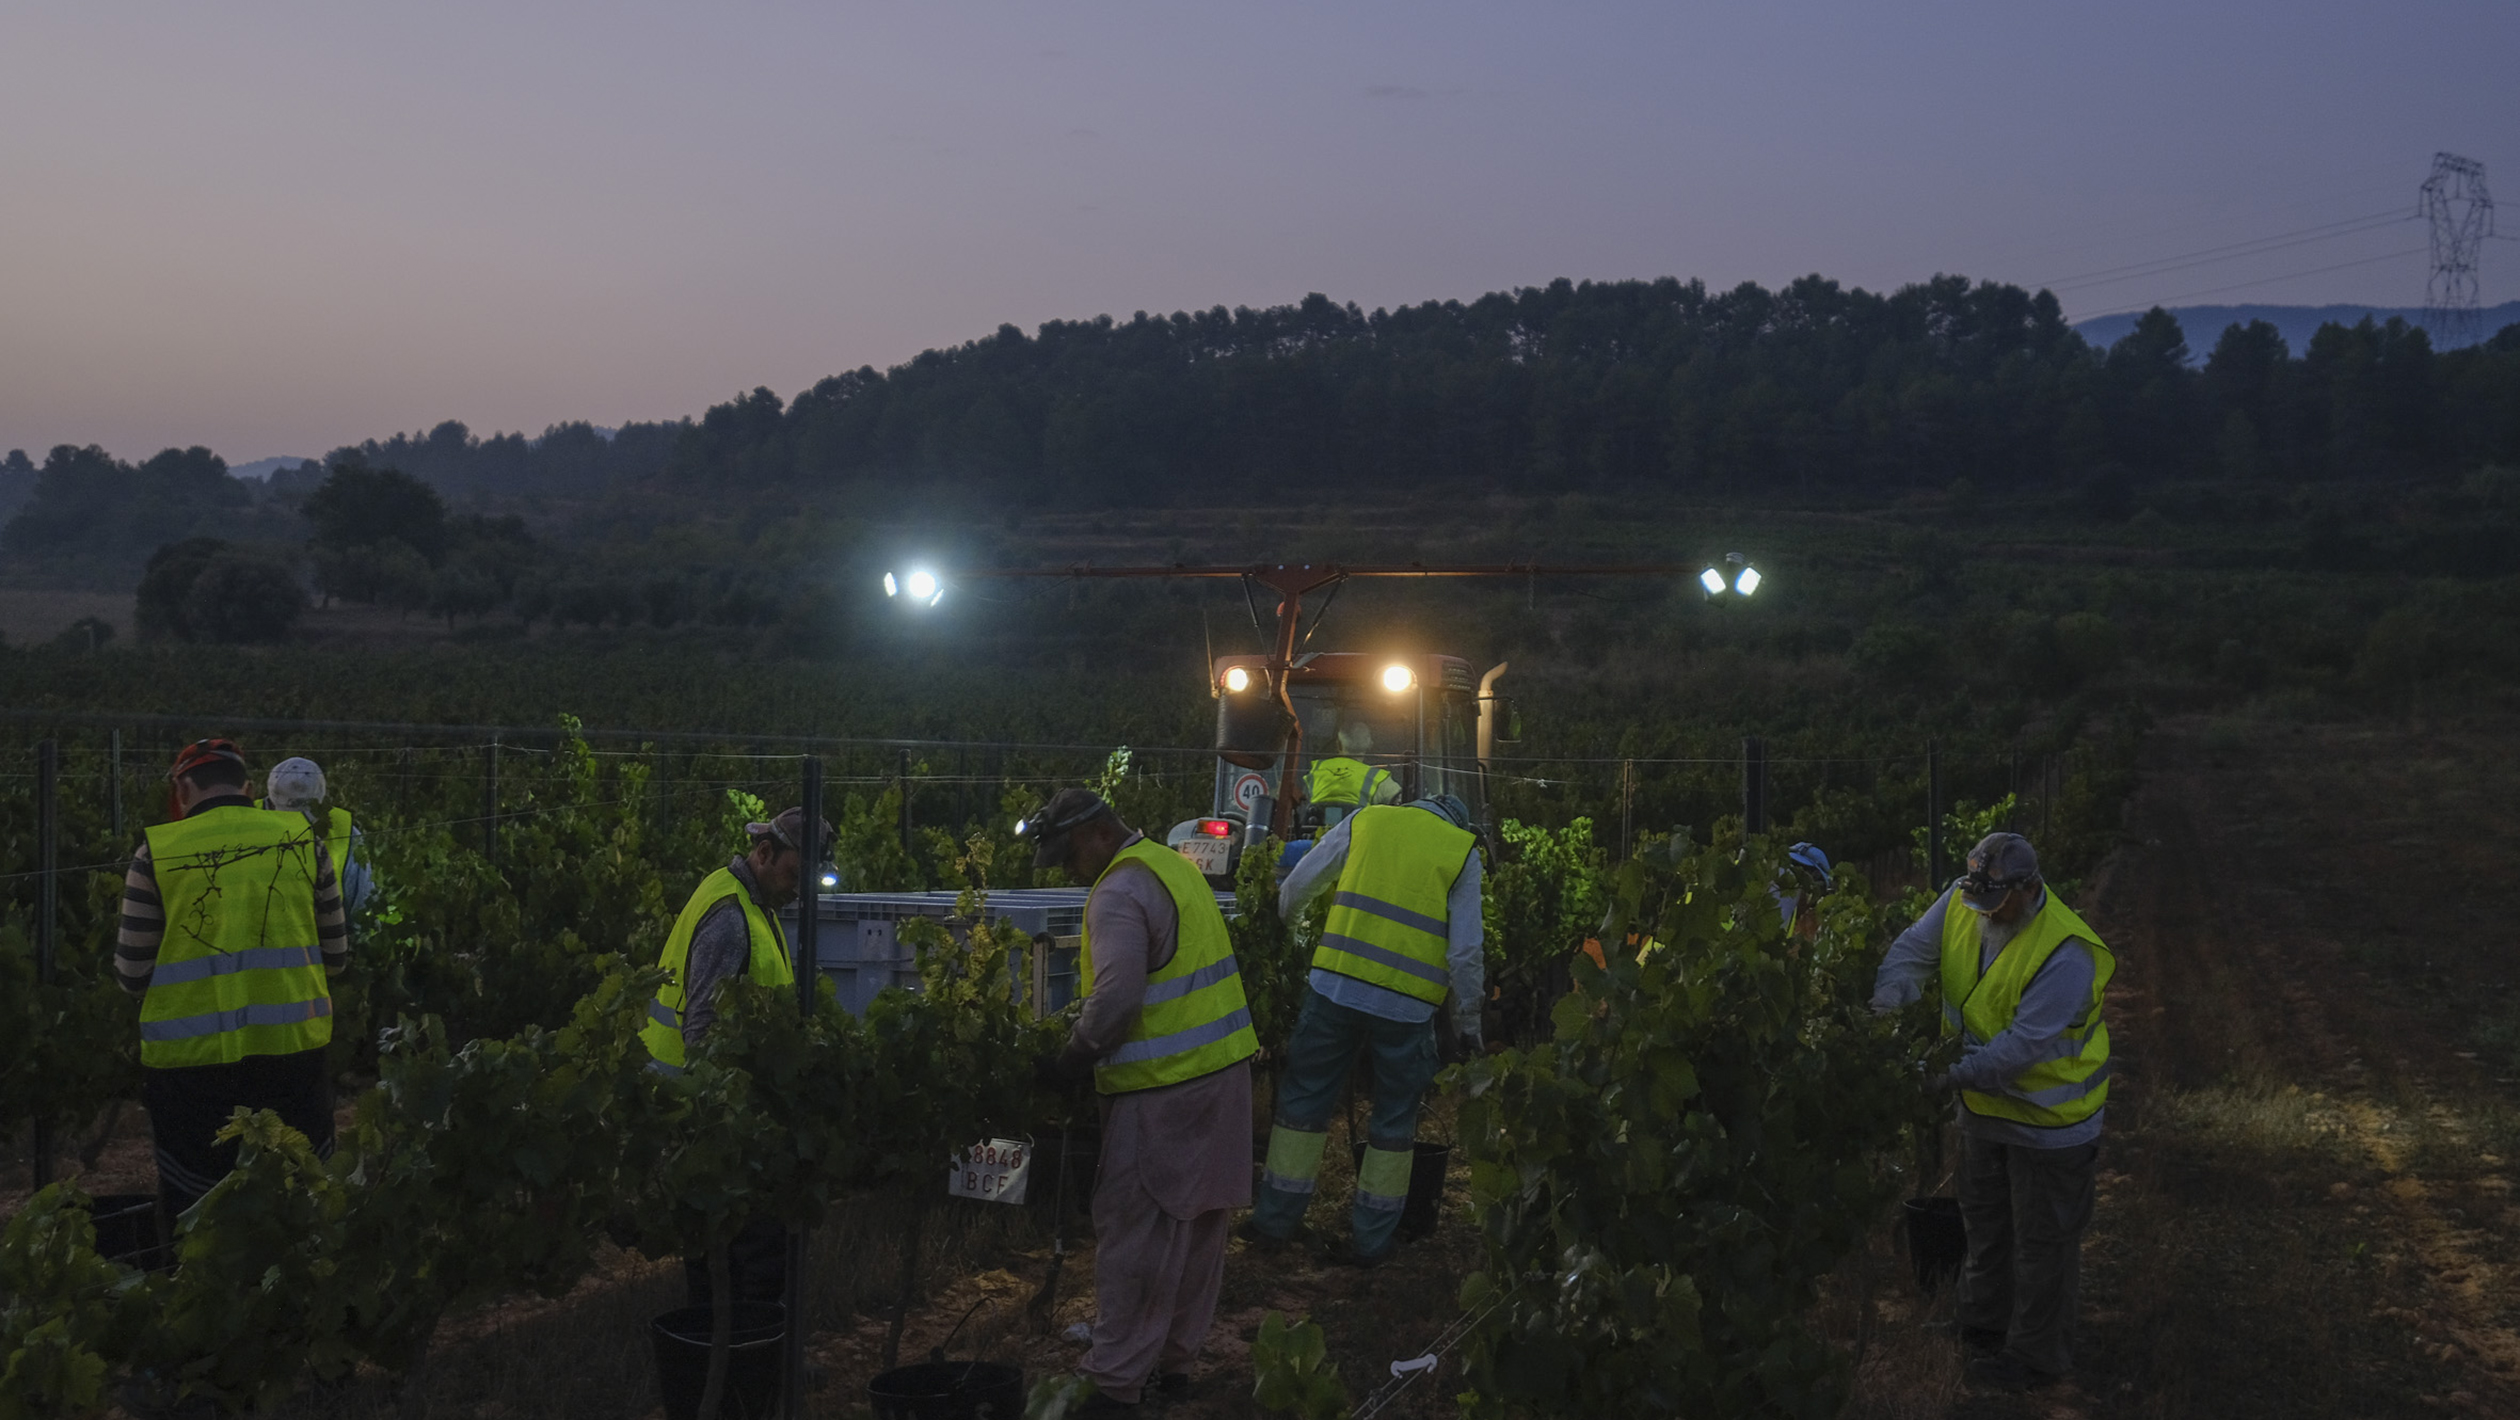 Familia Torres workers harvest at night